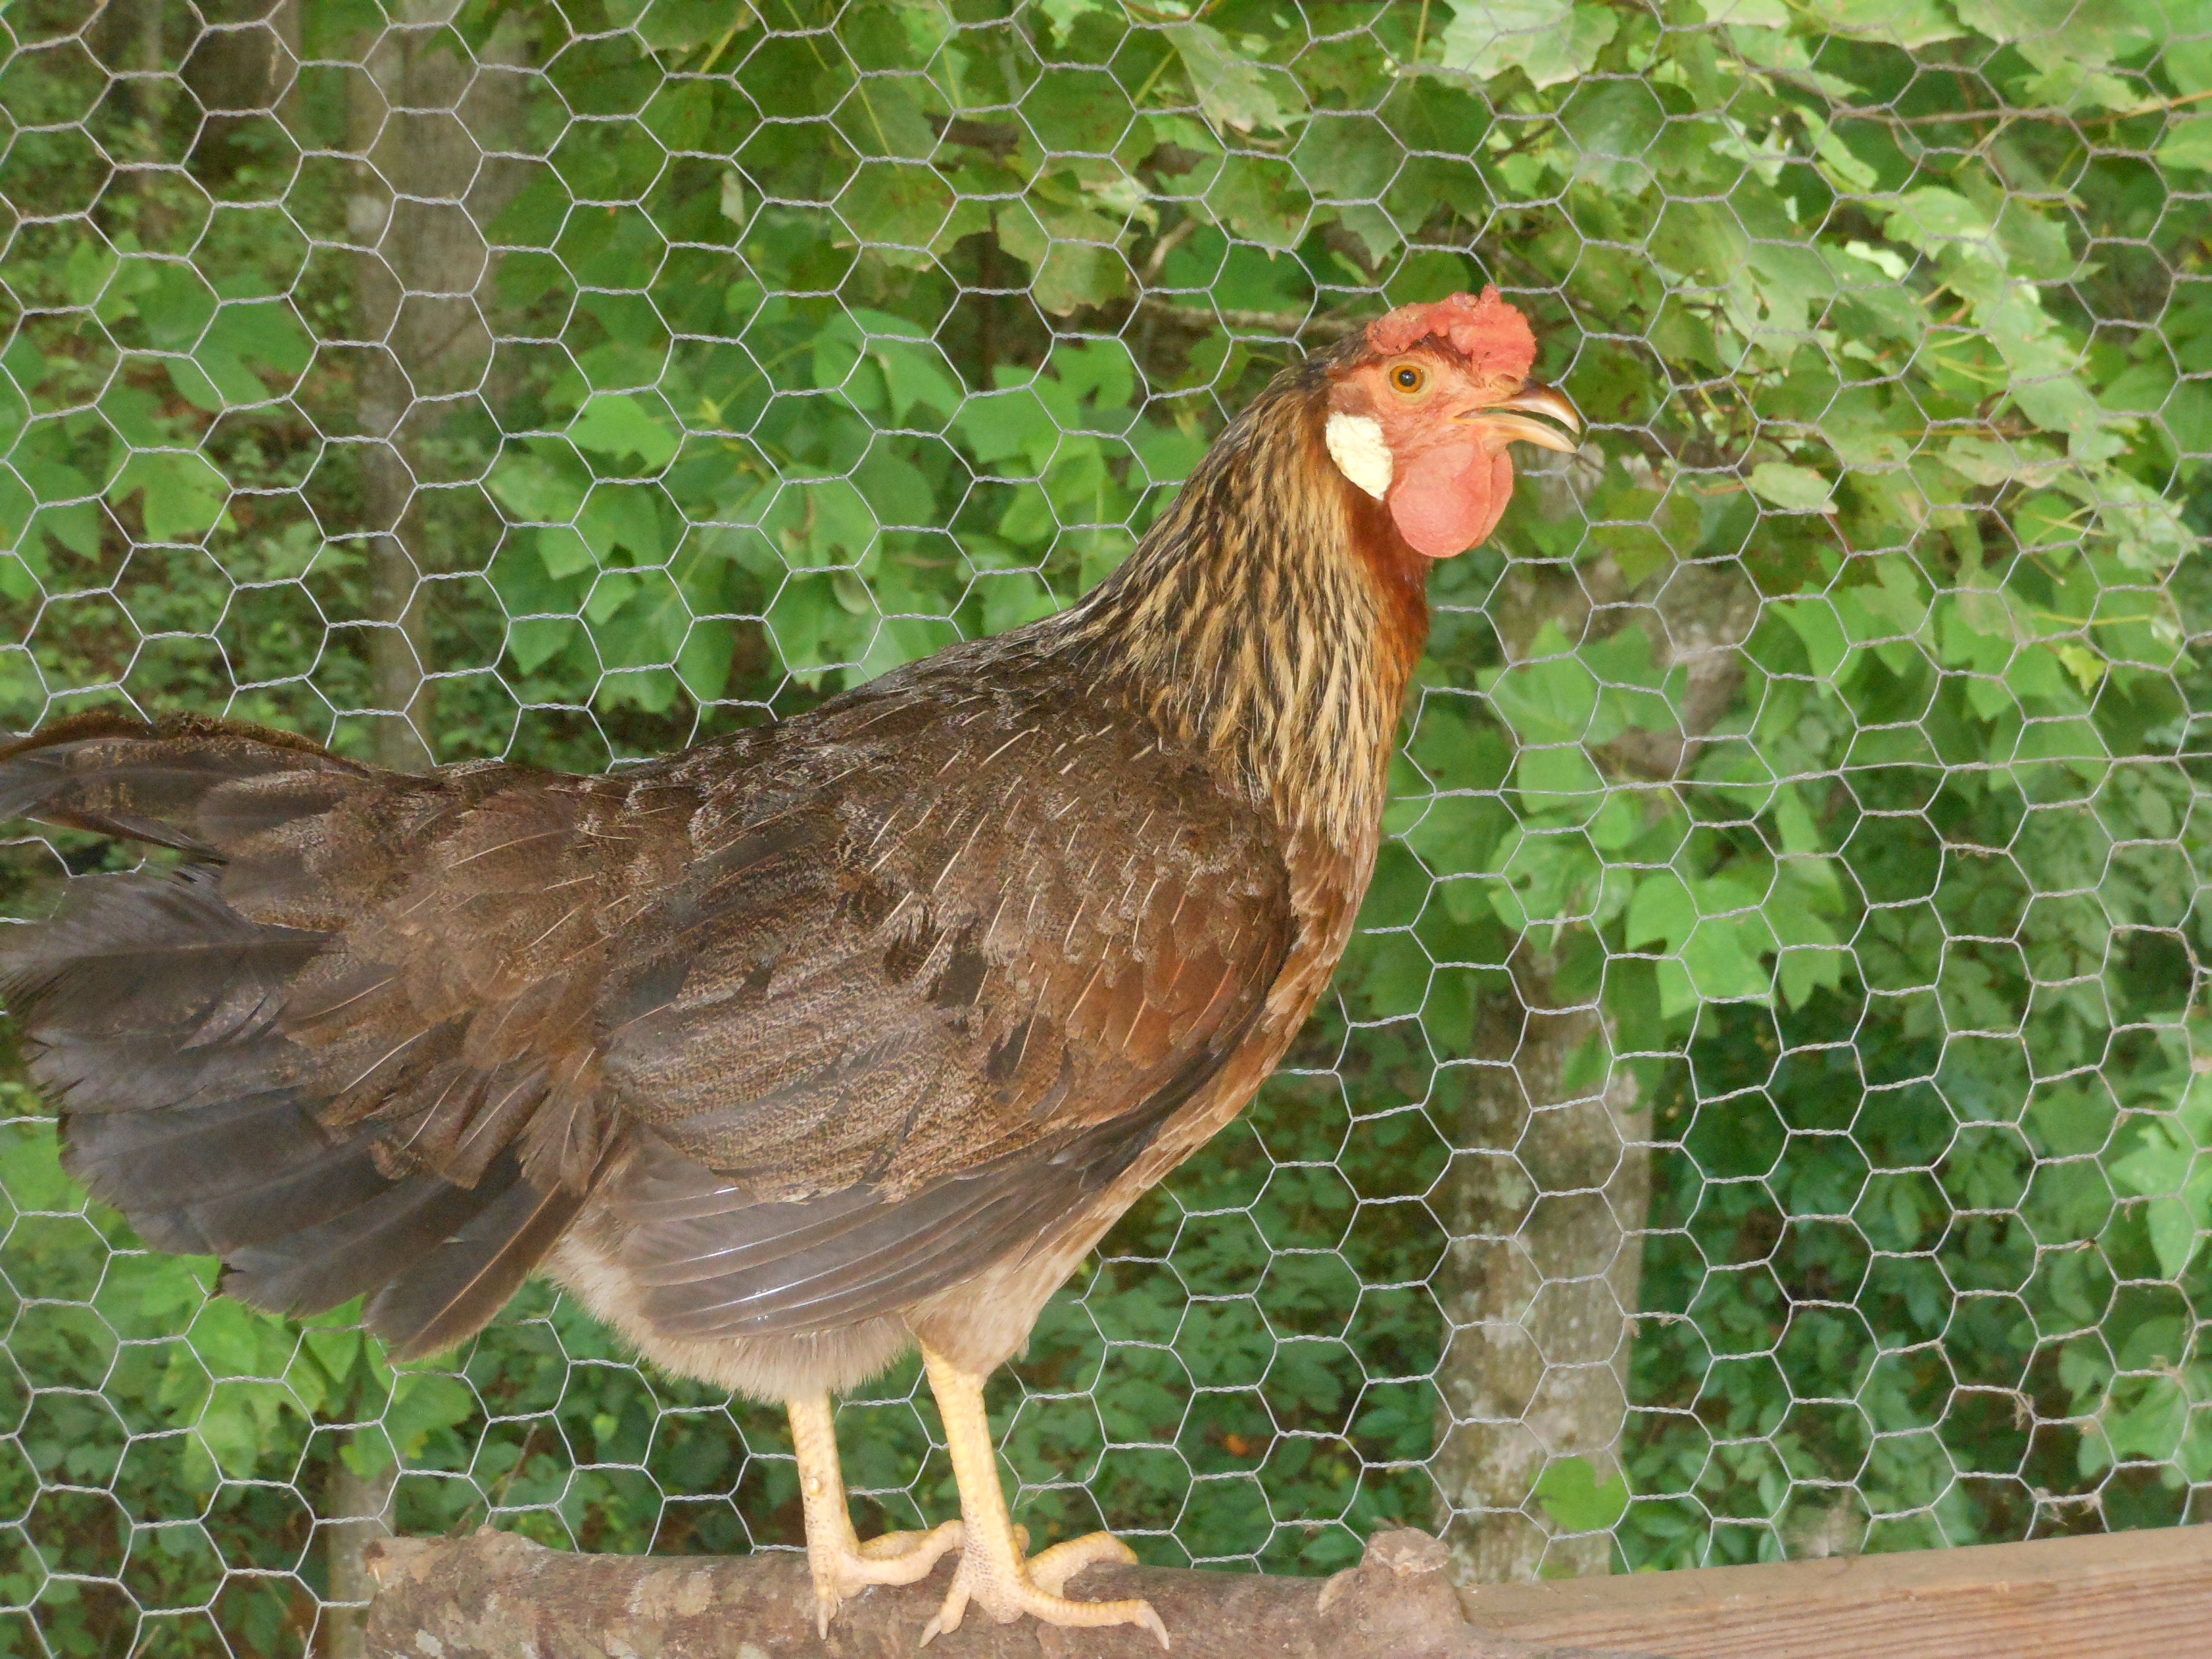 Lizzy the hen